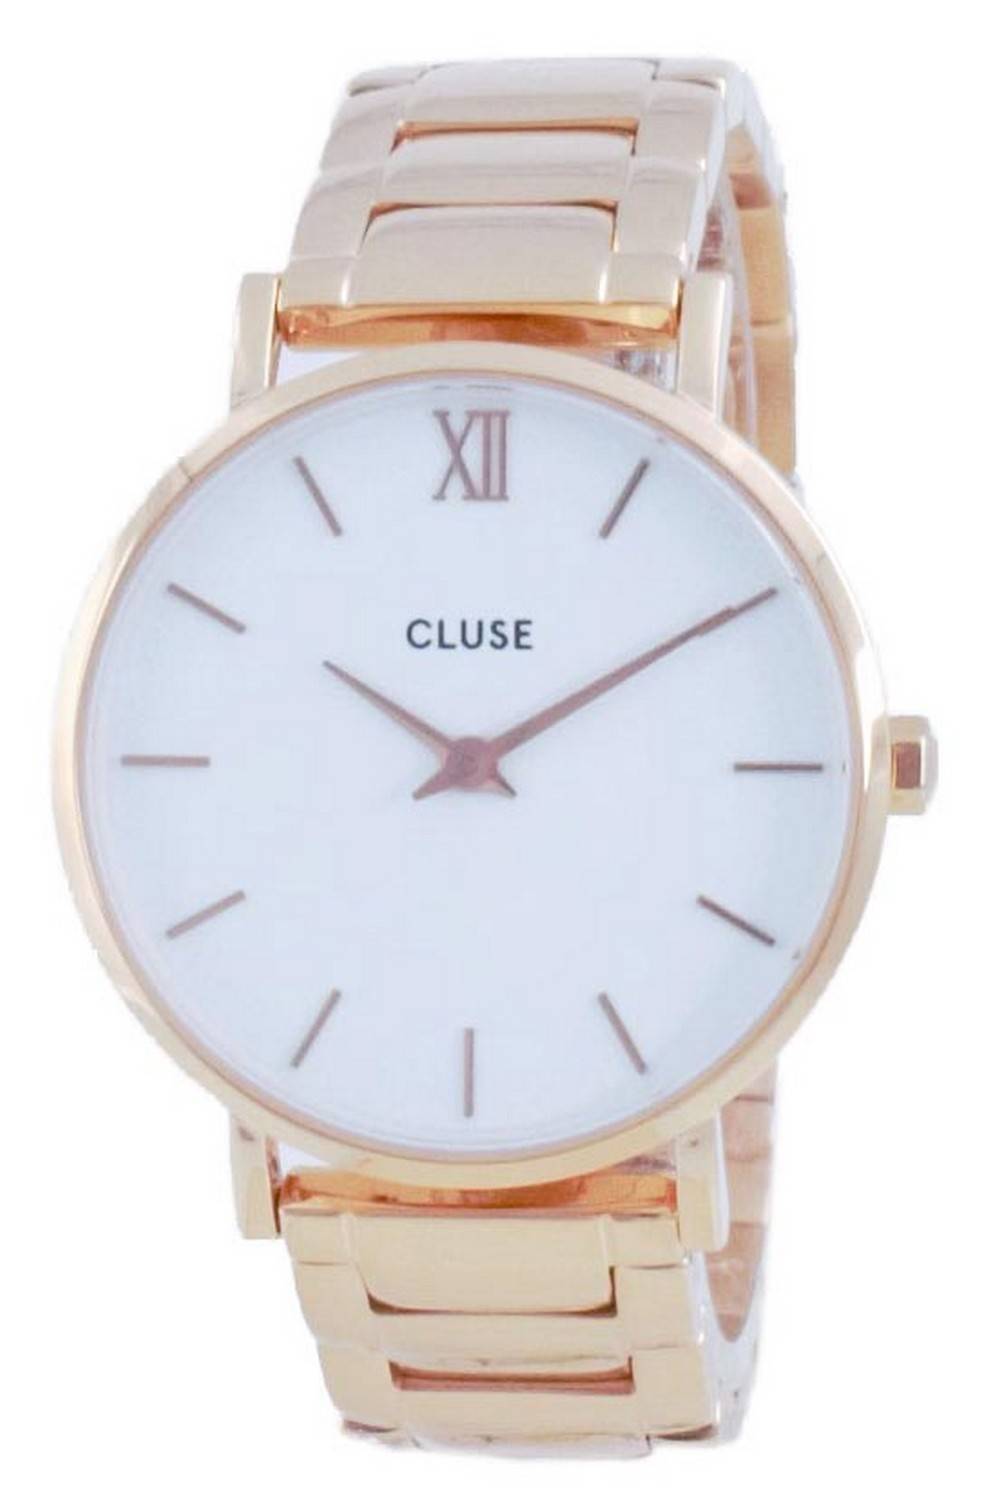 Cluse Minuit 3-Link White Dial Rose Gold Tone Stainless Steel Quartz CW0101203027 Women's Watch